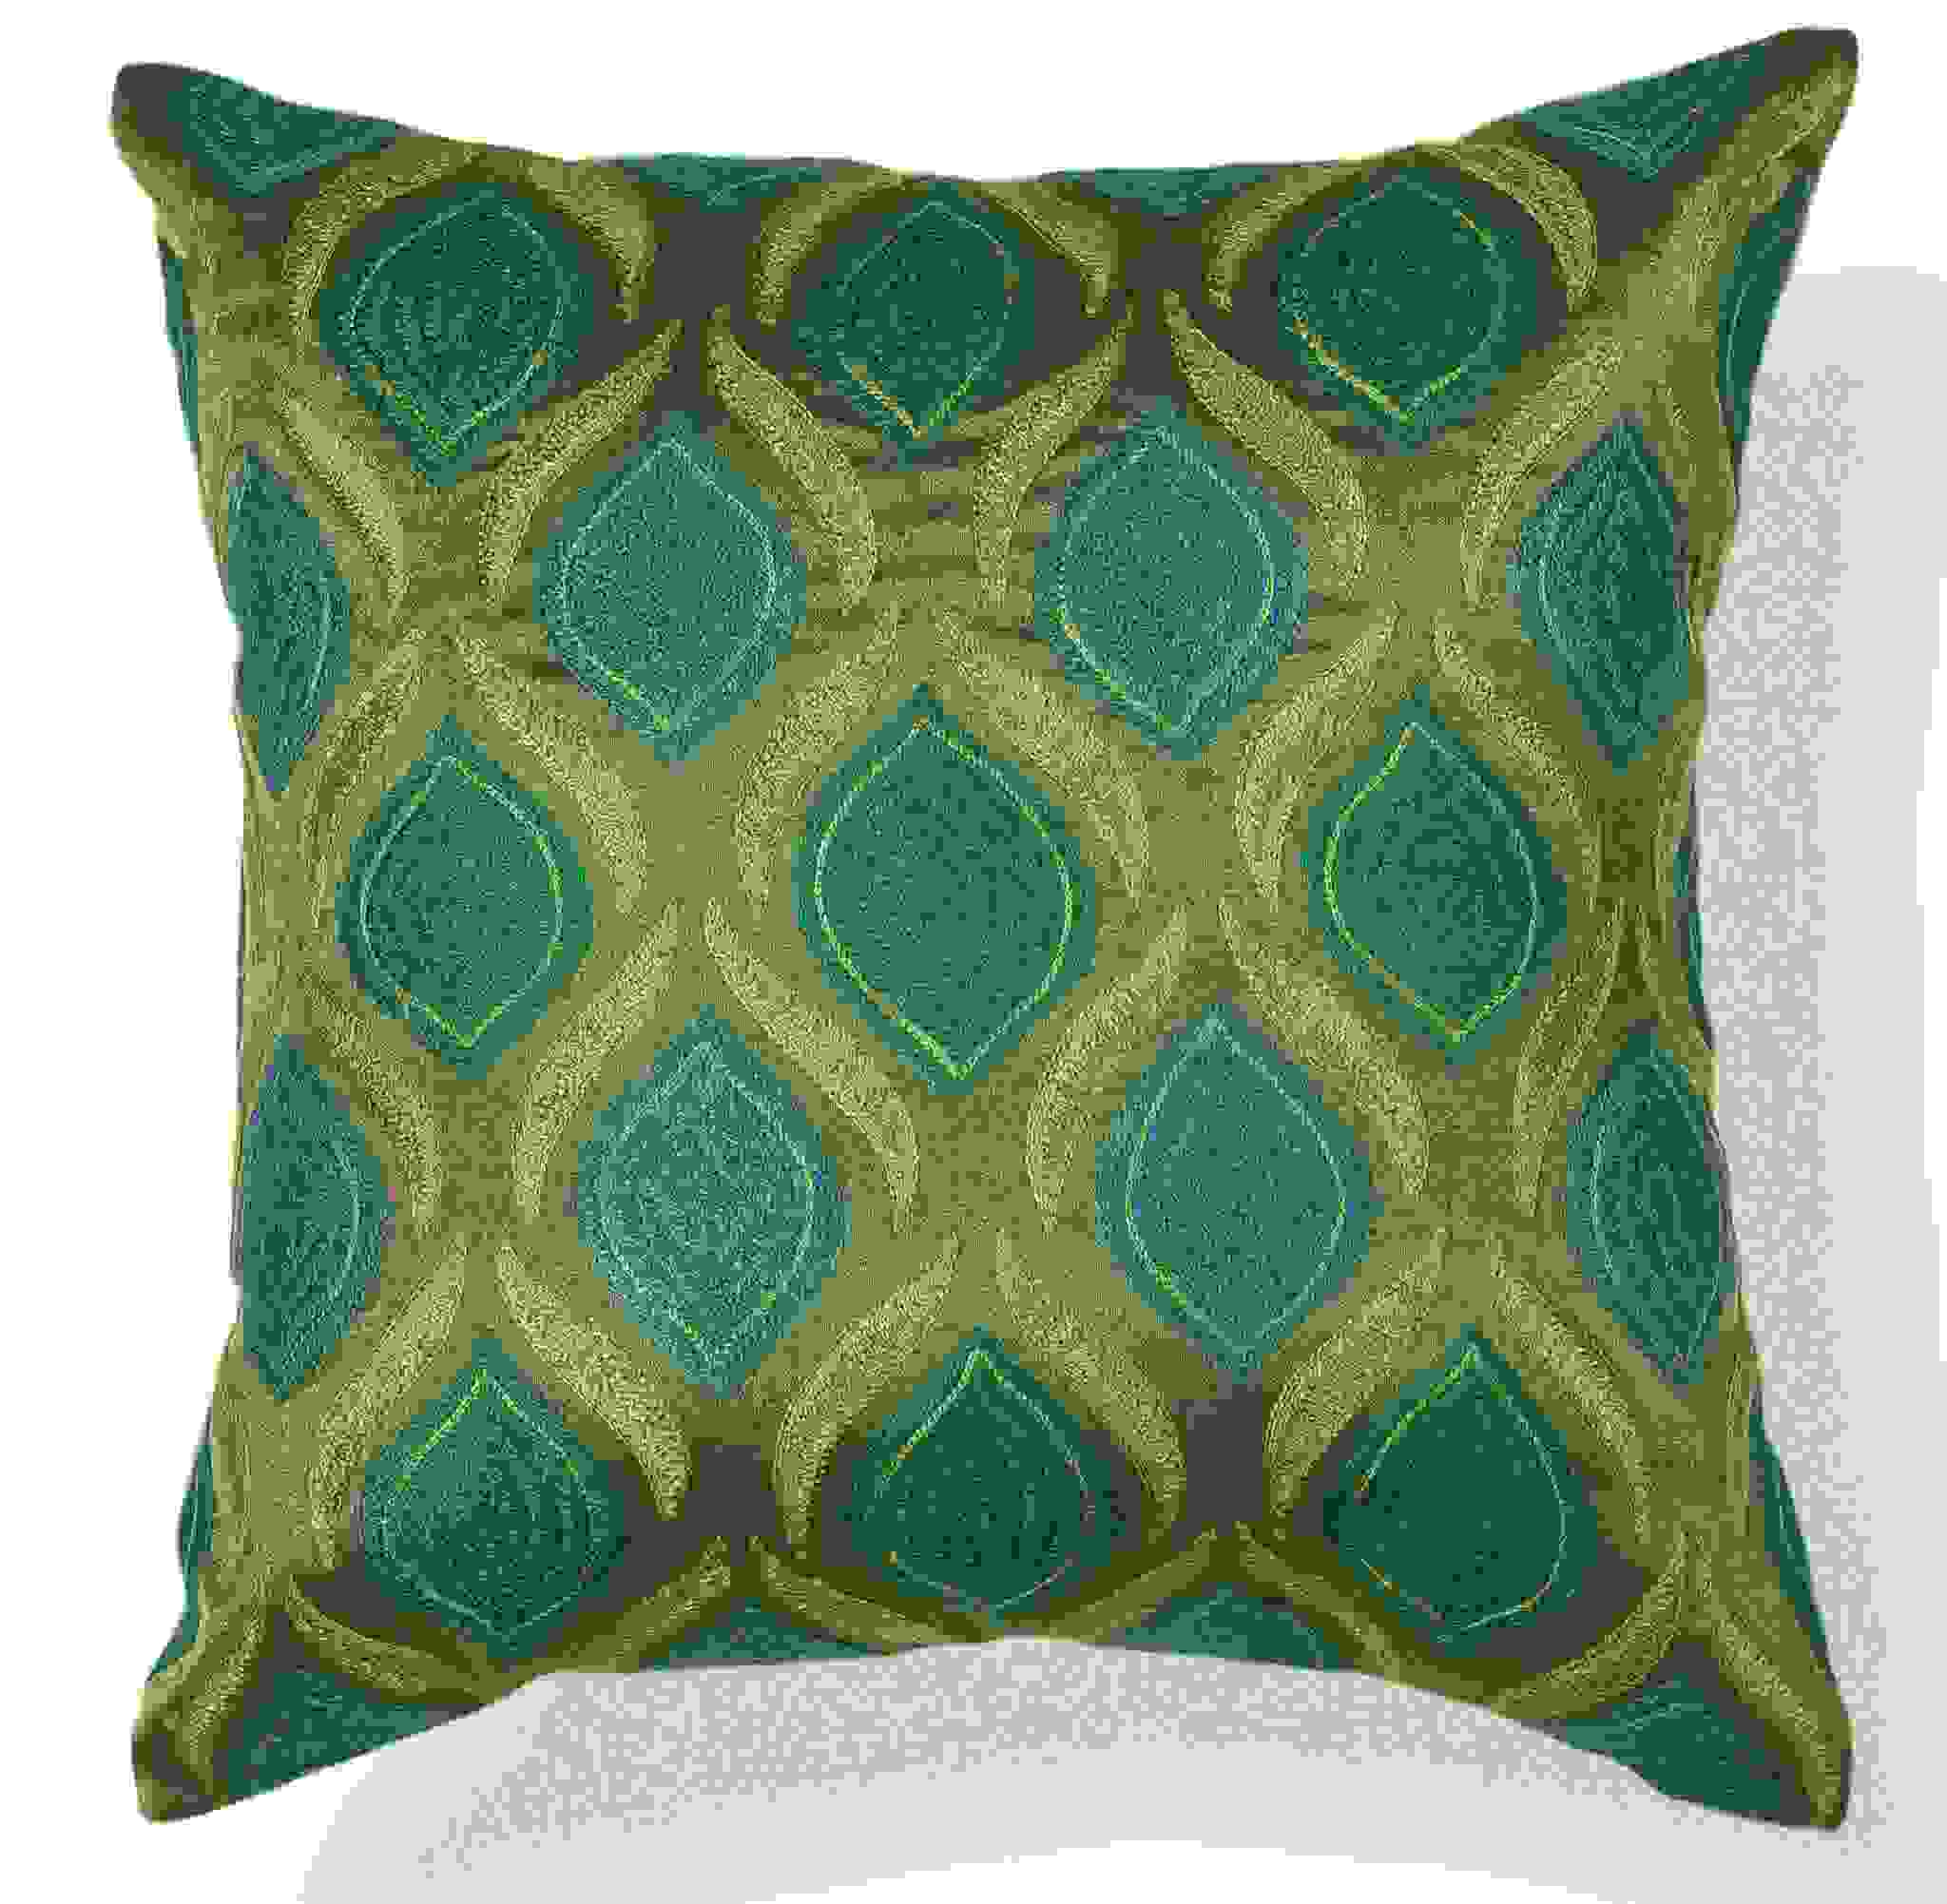 18" x 18" Polyester Teal or Green Pillow